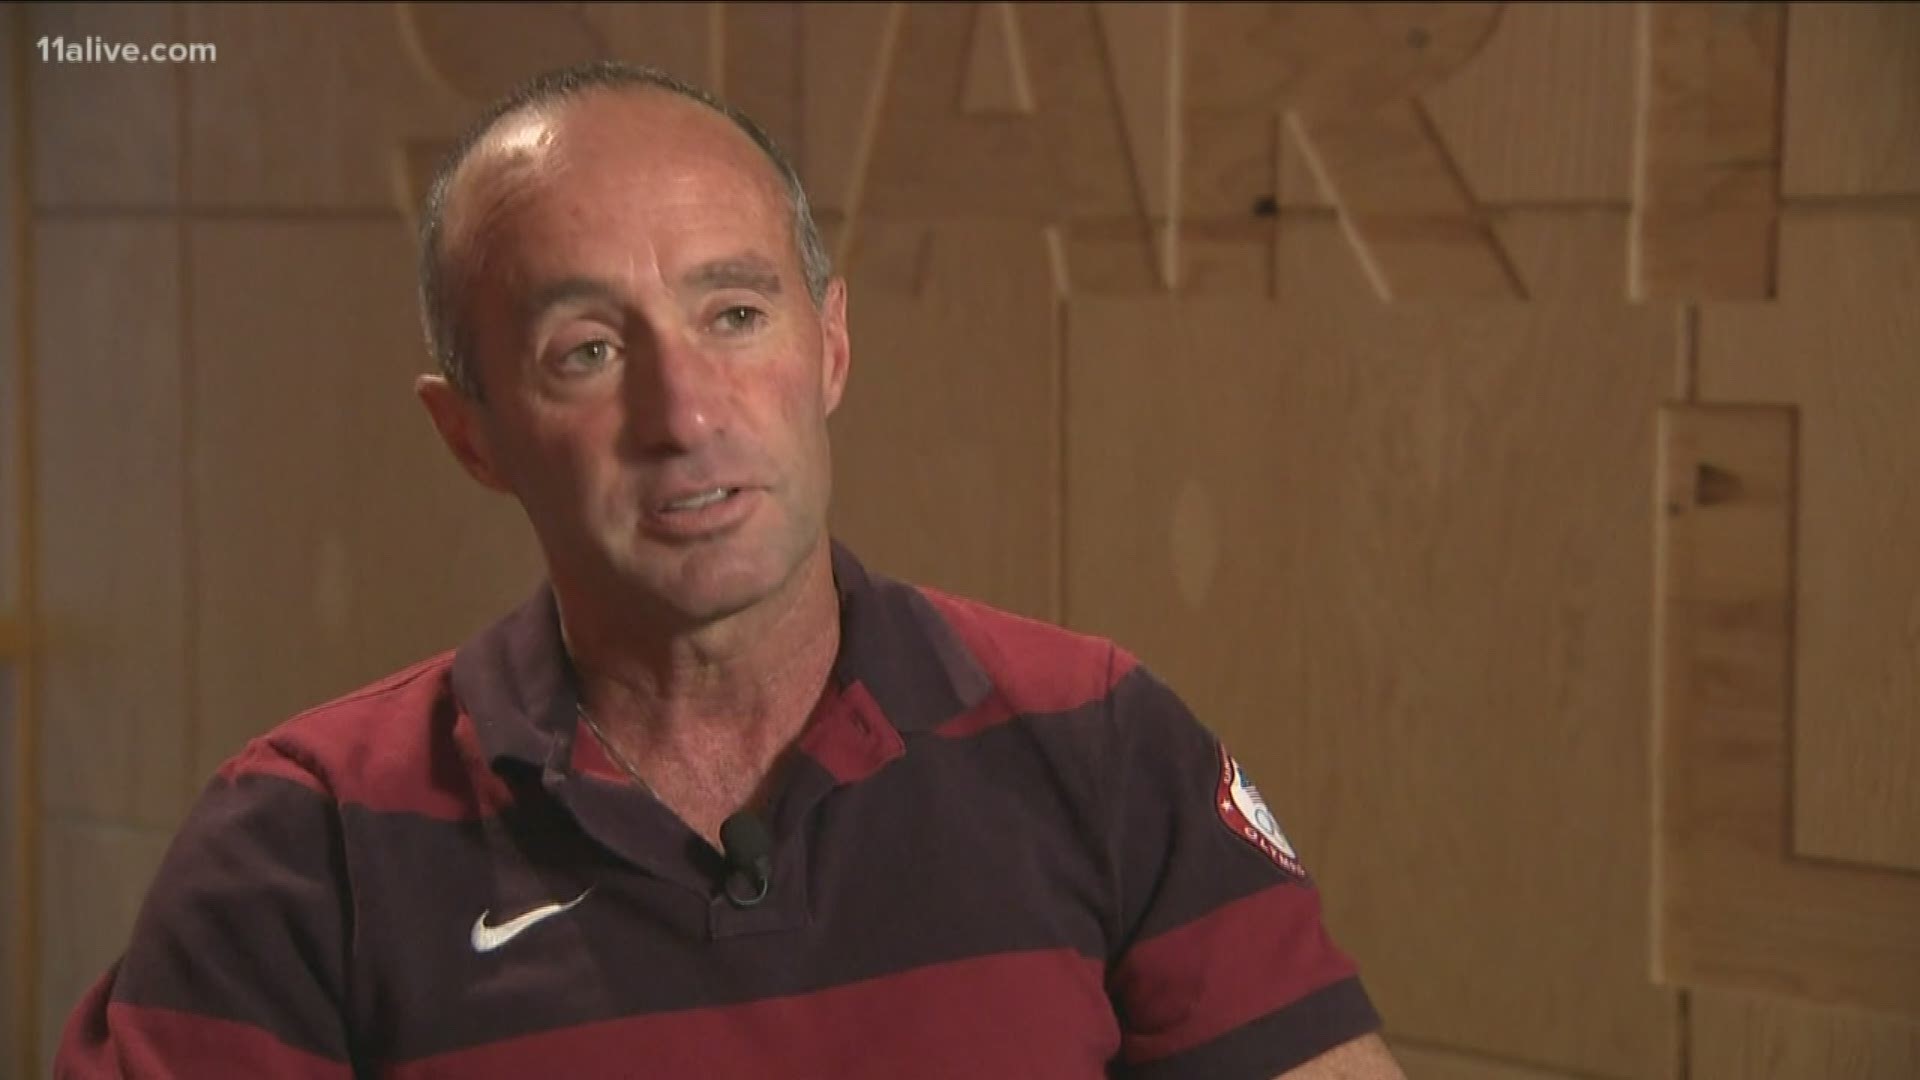 Salazar heads up the elite, Nike-funded Oregon Project and has trained some of the best distance runners in the world.